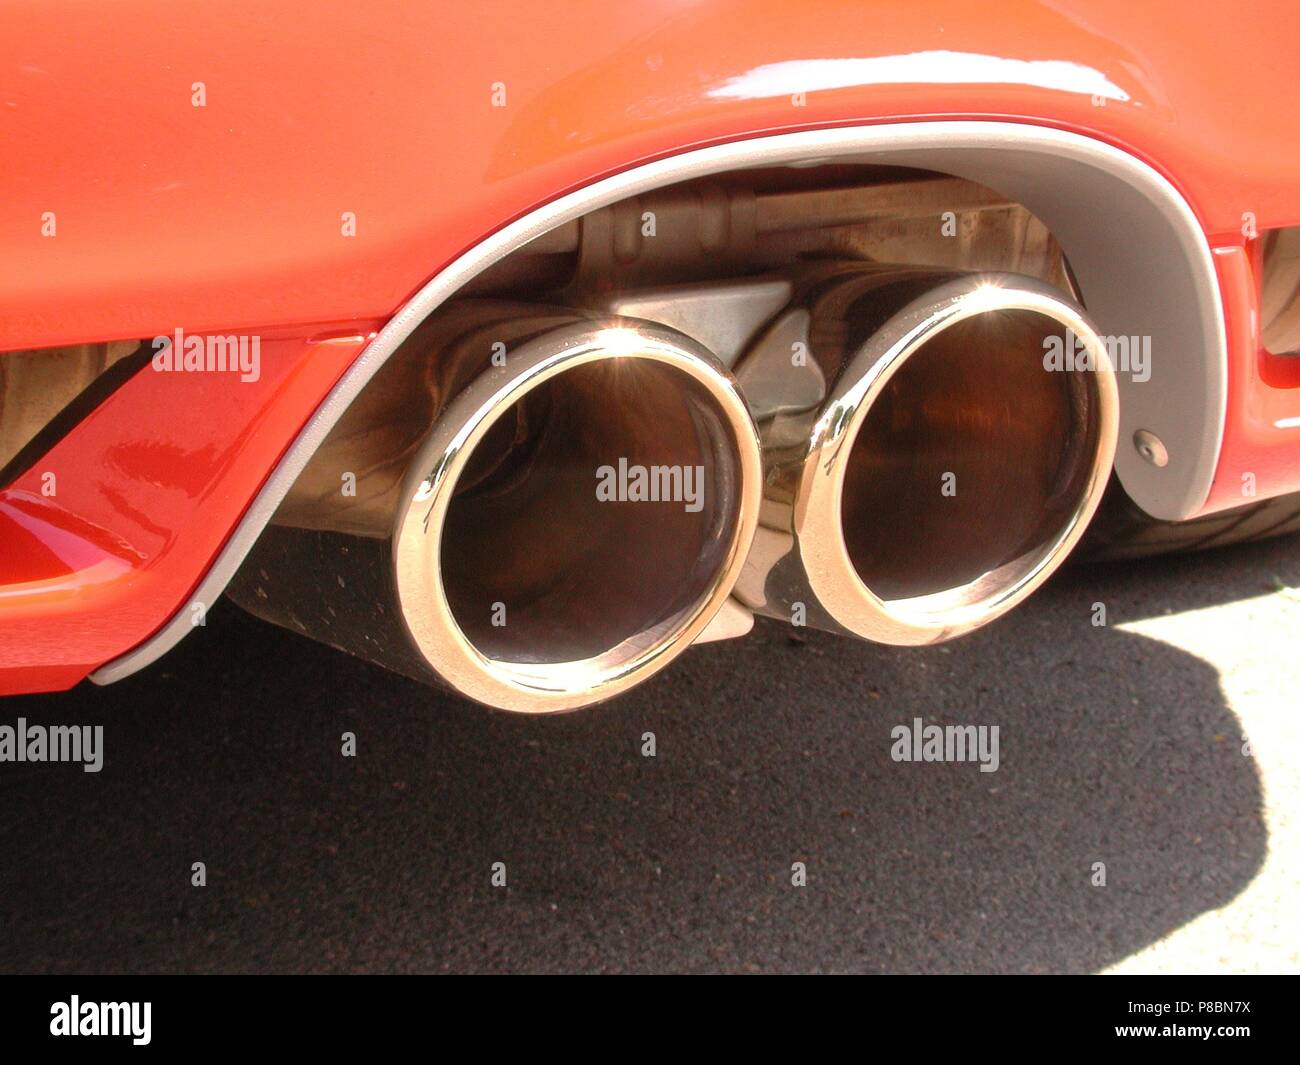 Porsche Boxster S in Red - 2002 model - showing twin exhaust tips Stock Photo